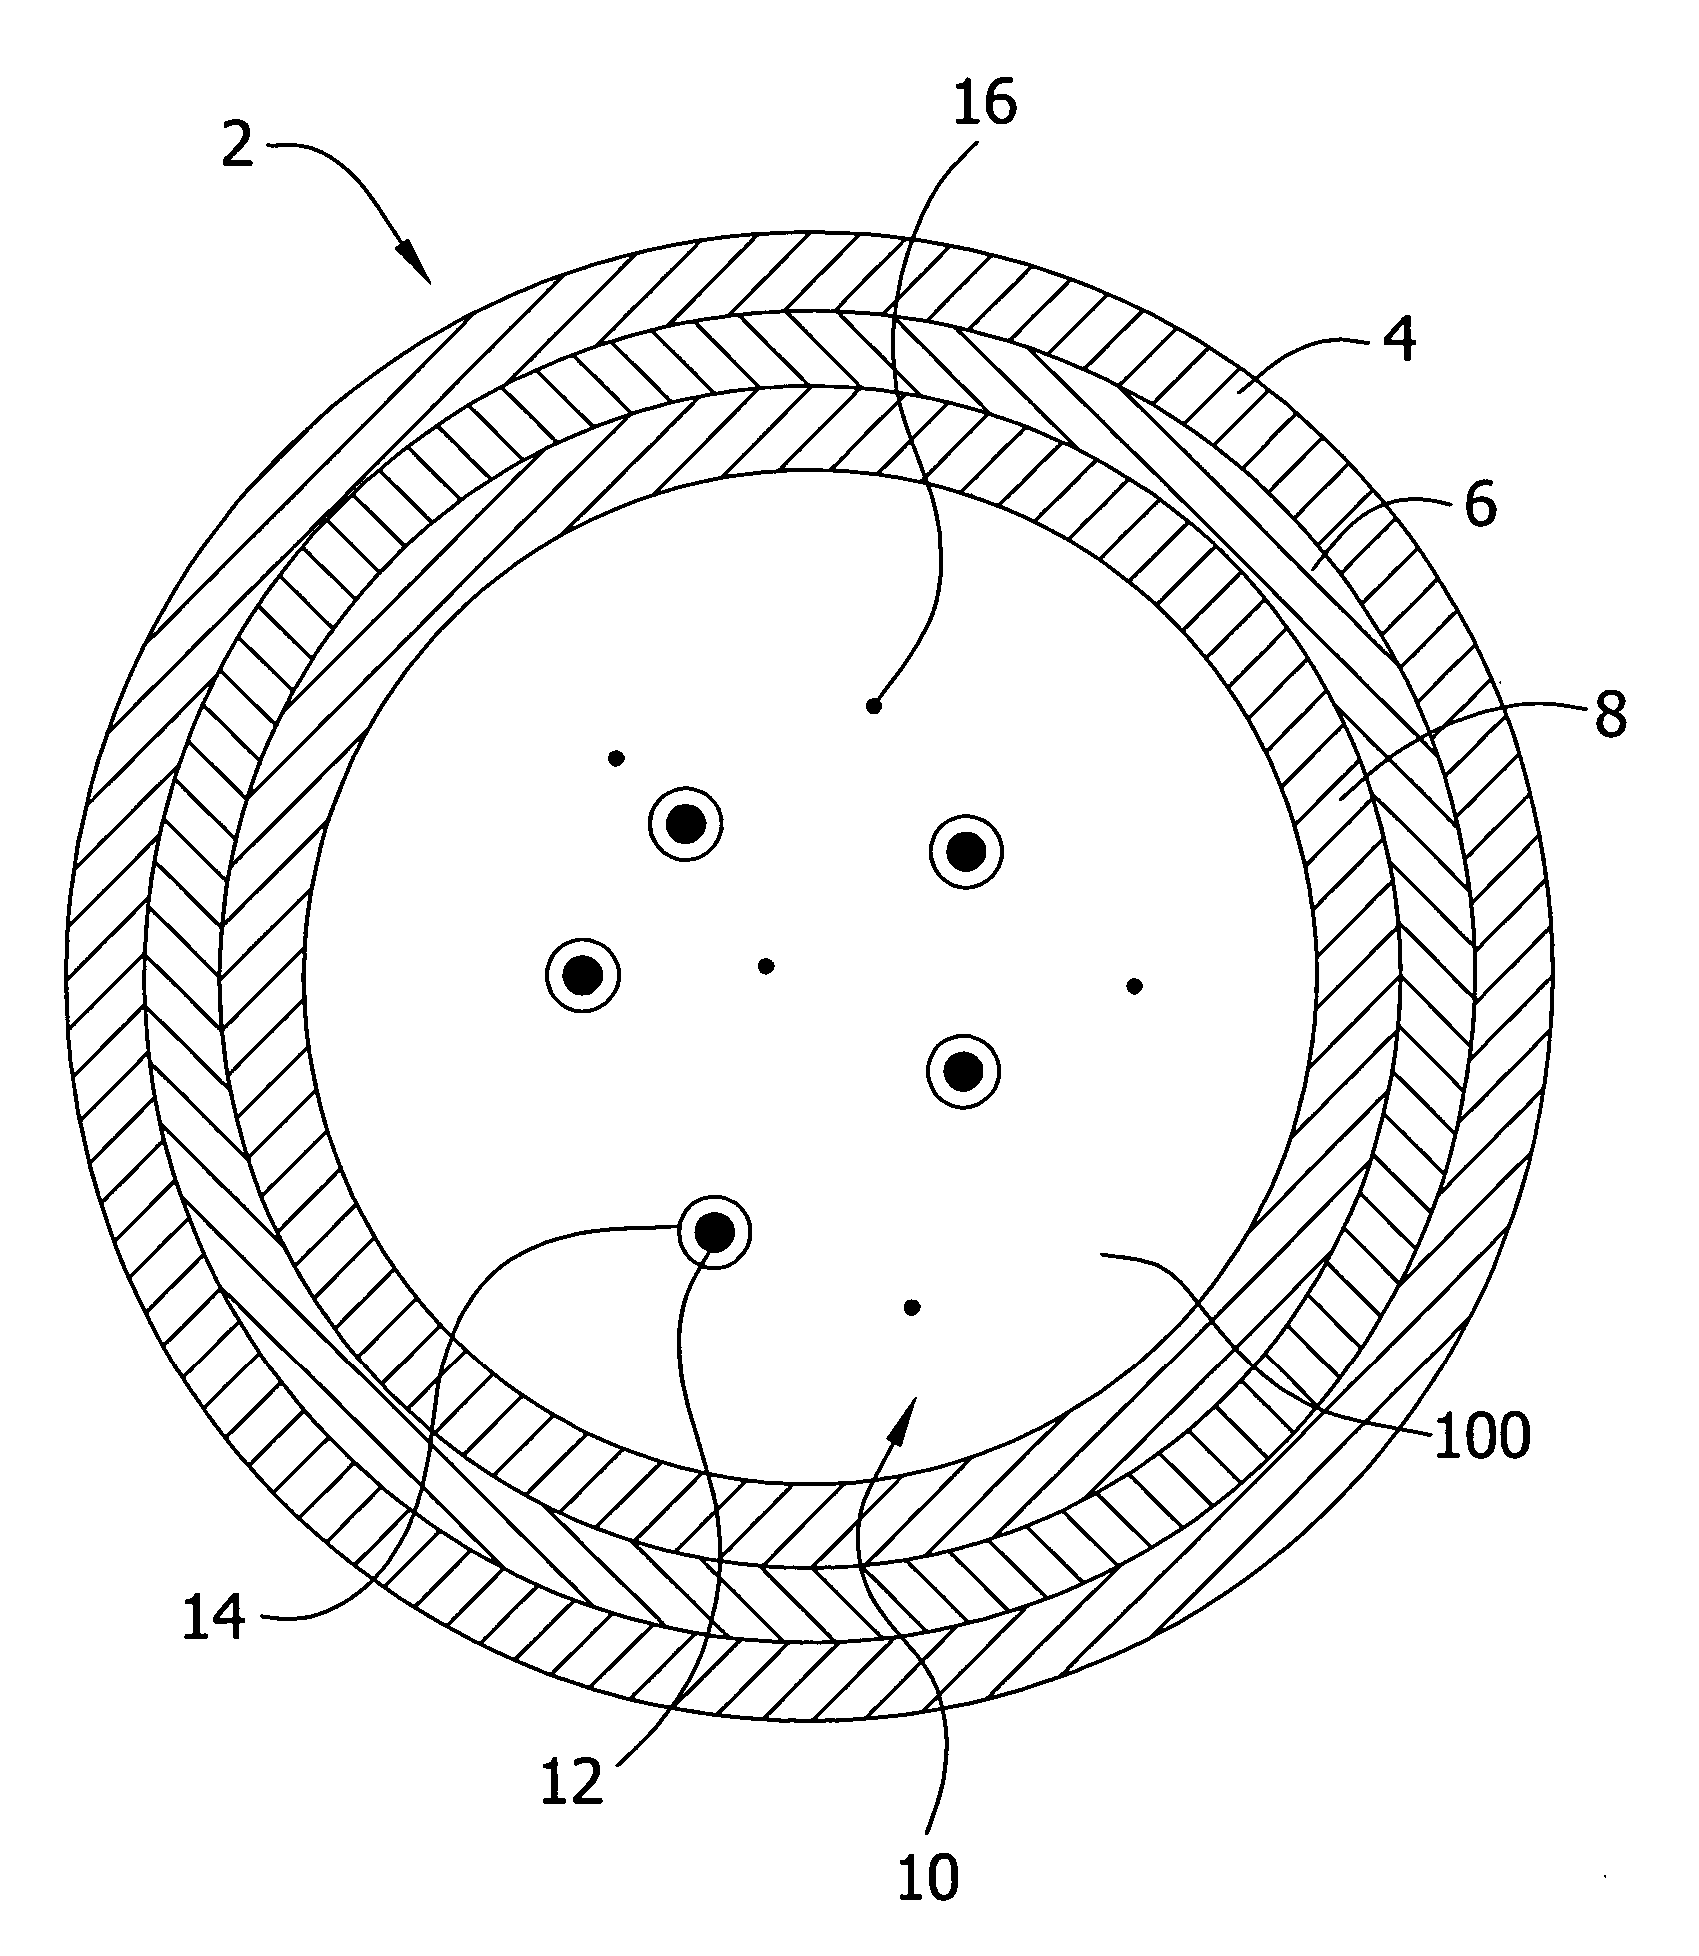 Microencapsulated delivery vehicles including cooling agents